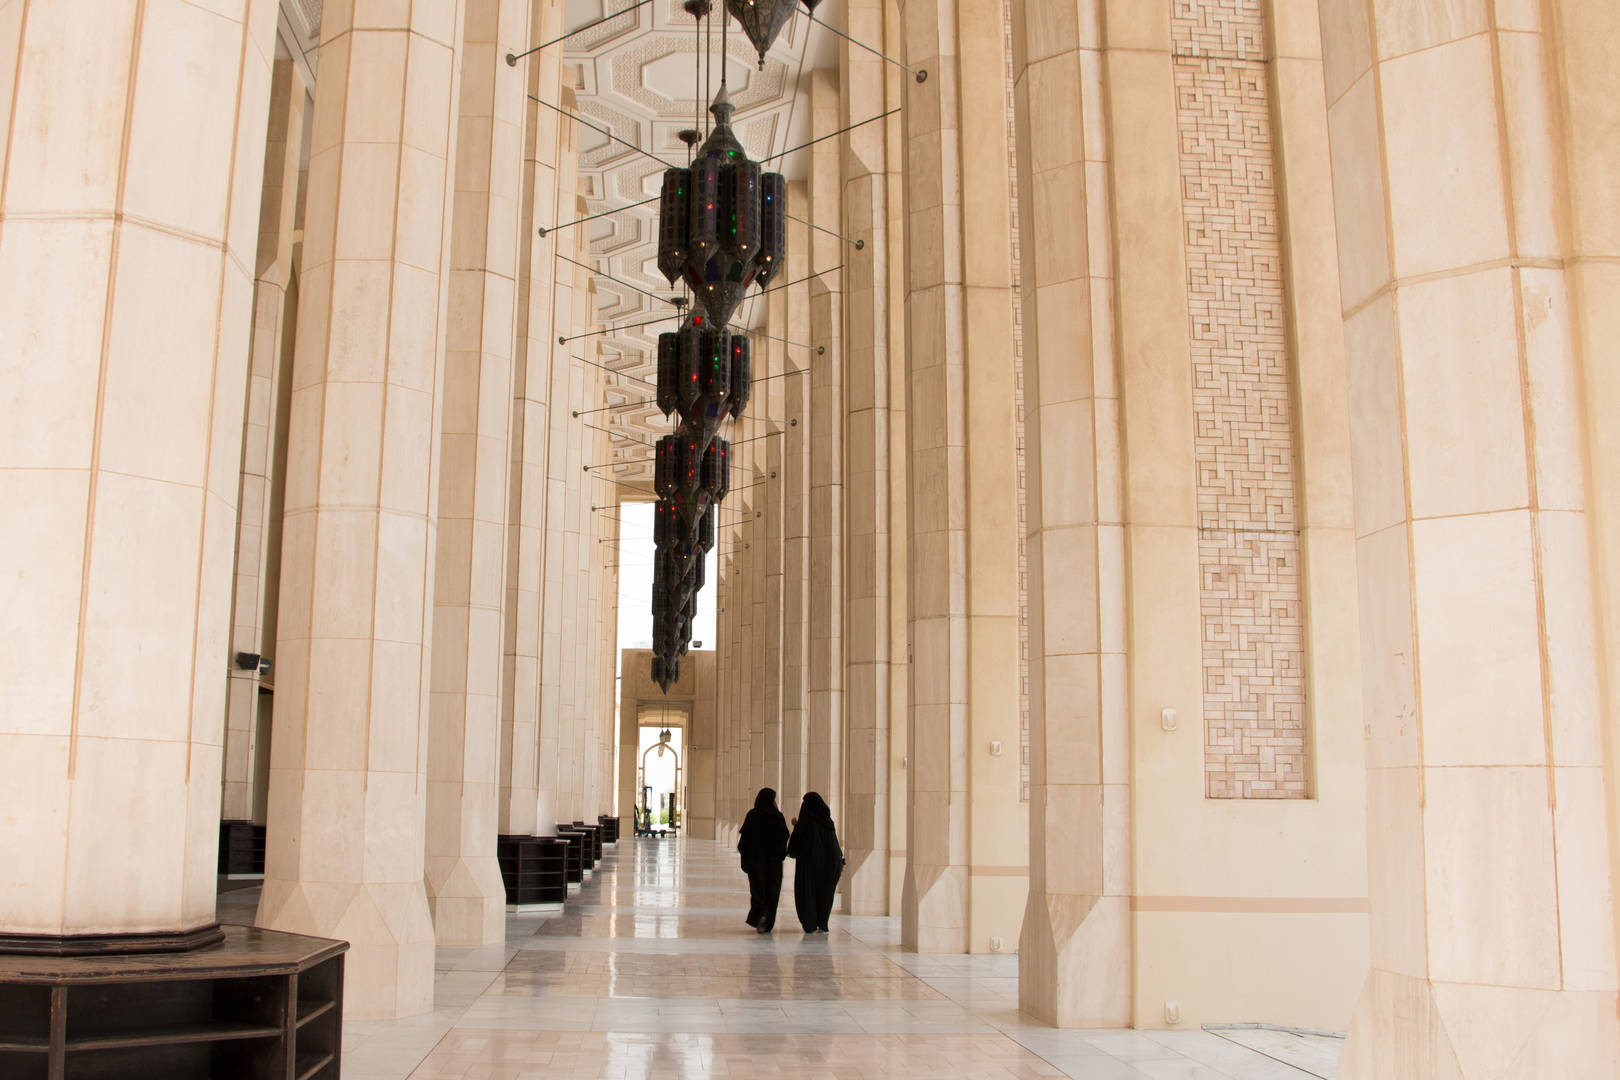 Inside the Grand Mosque in Kuwait